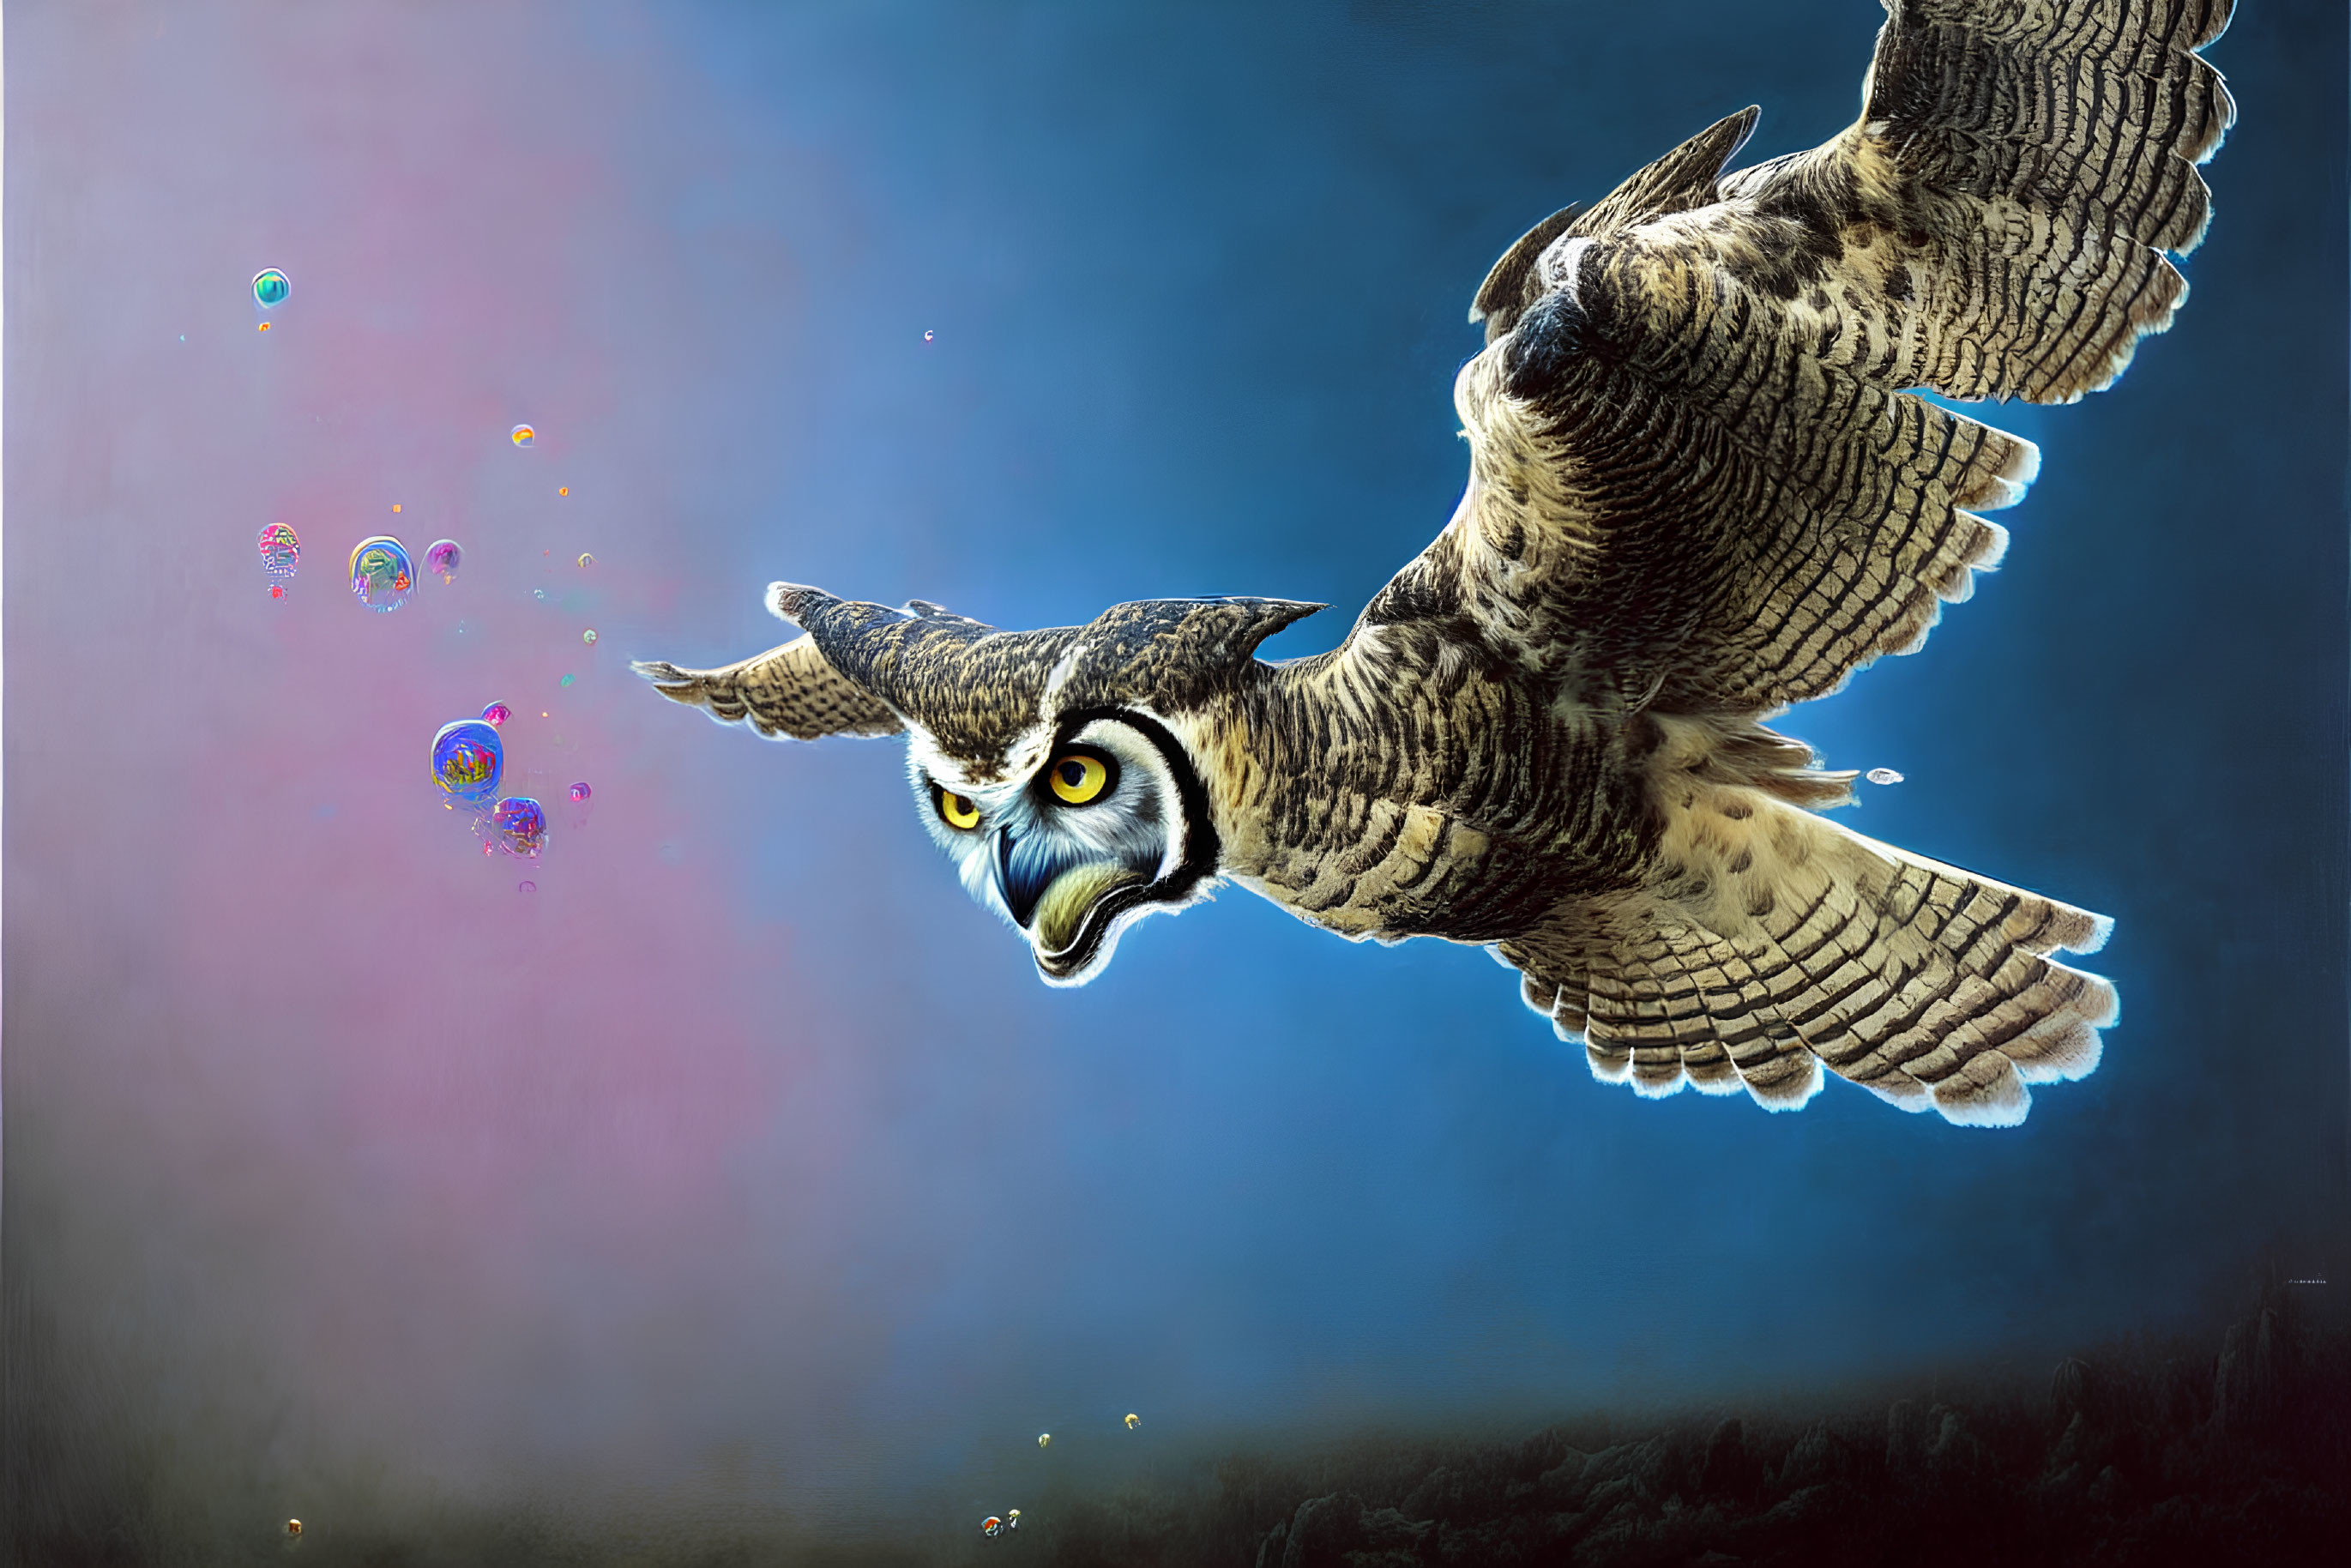 Owl flying in dusky sky with iridescent bubbles